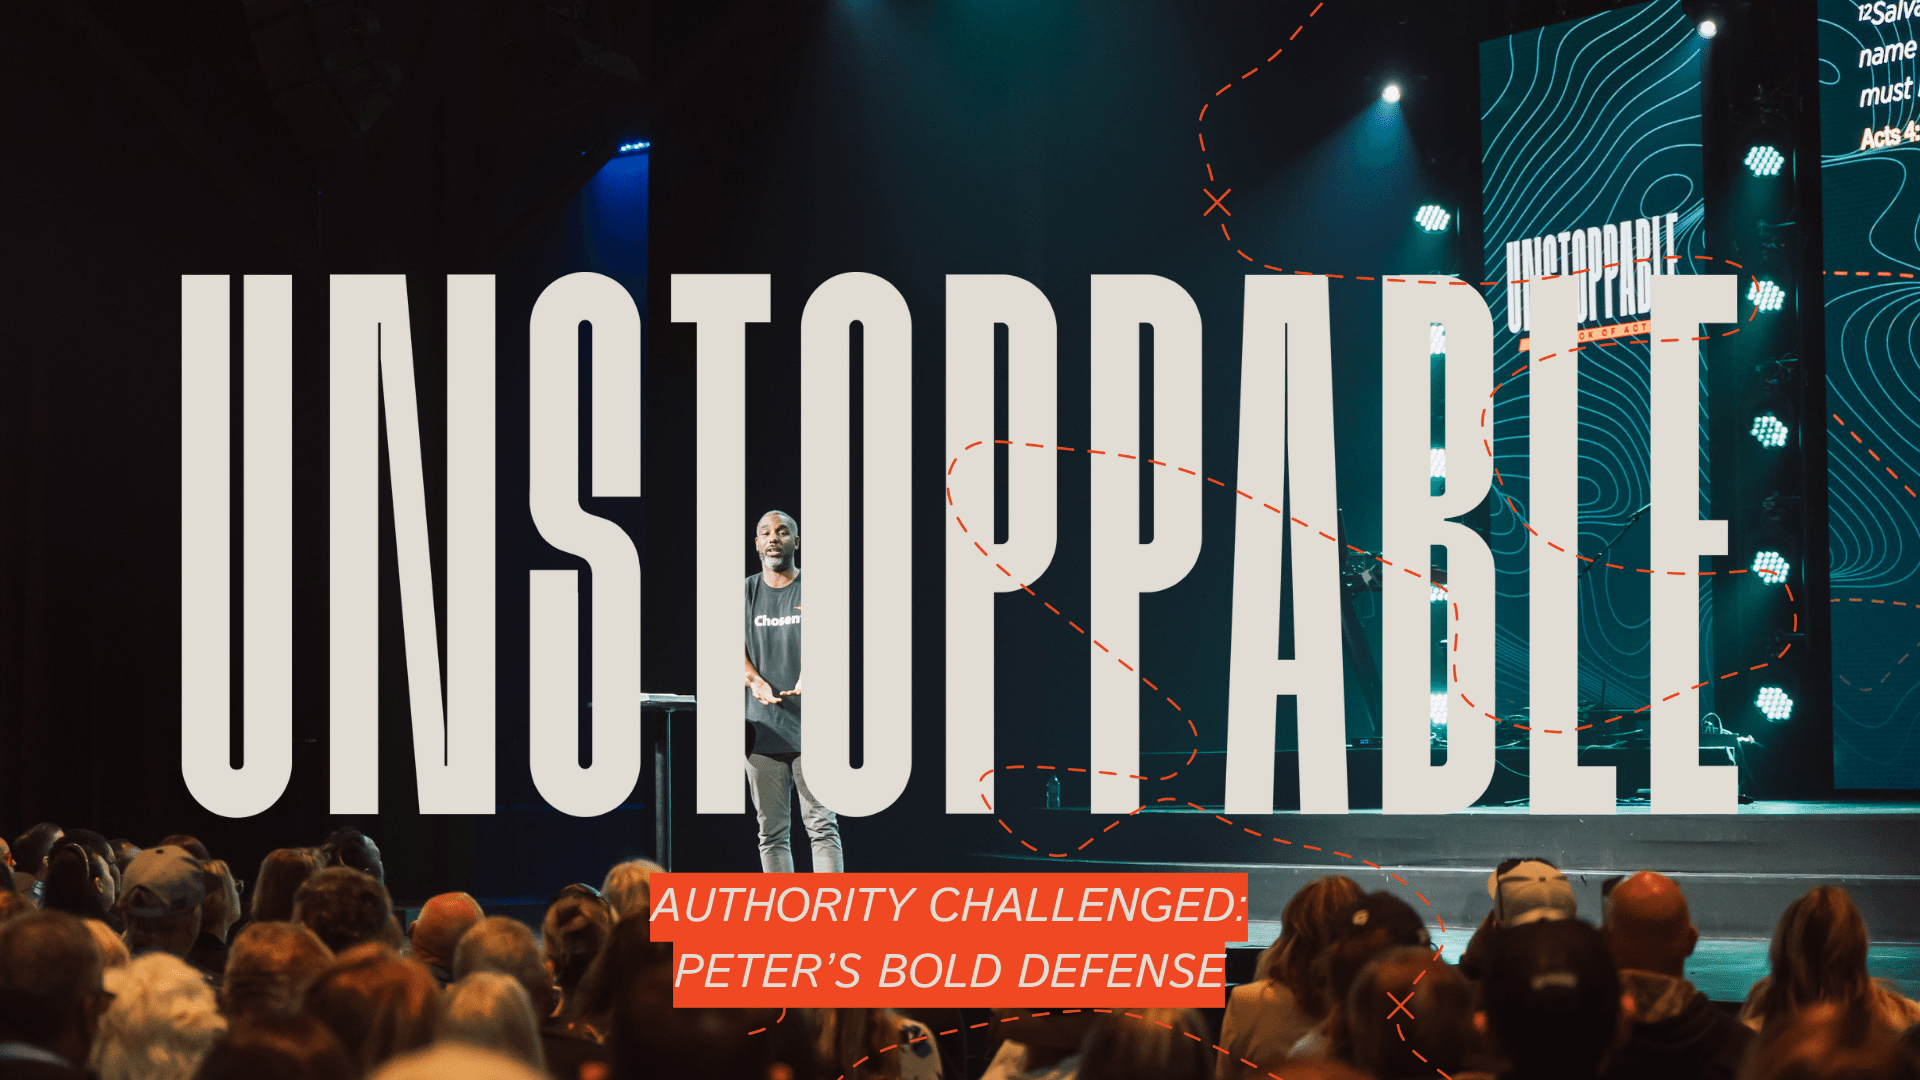 Authority Challenged: Peter’s Bold Defense